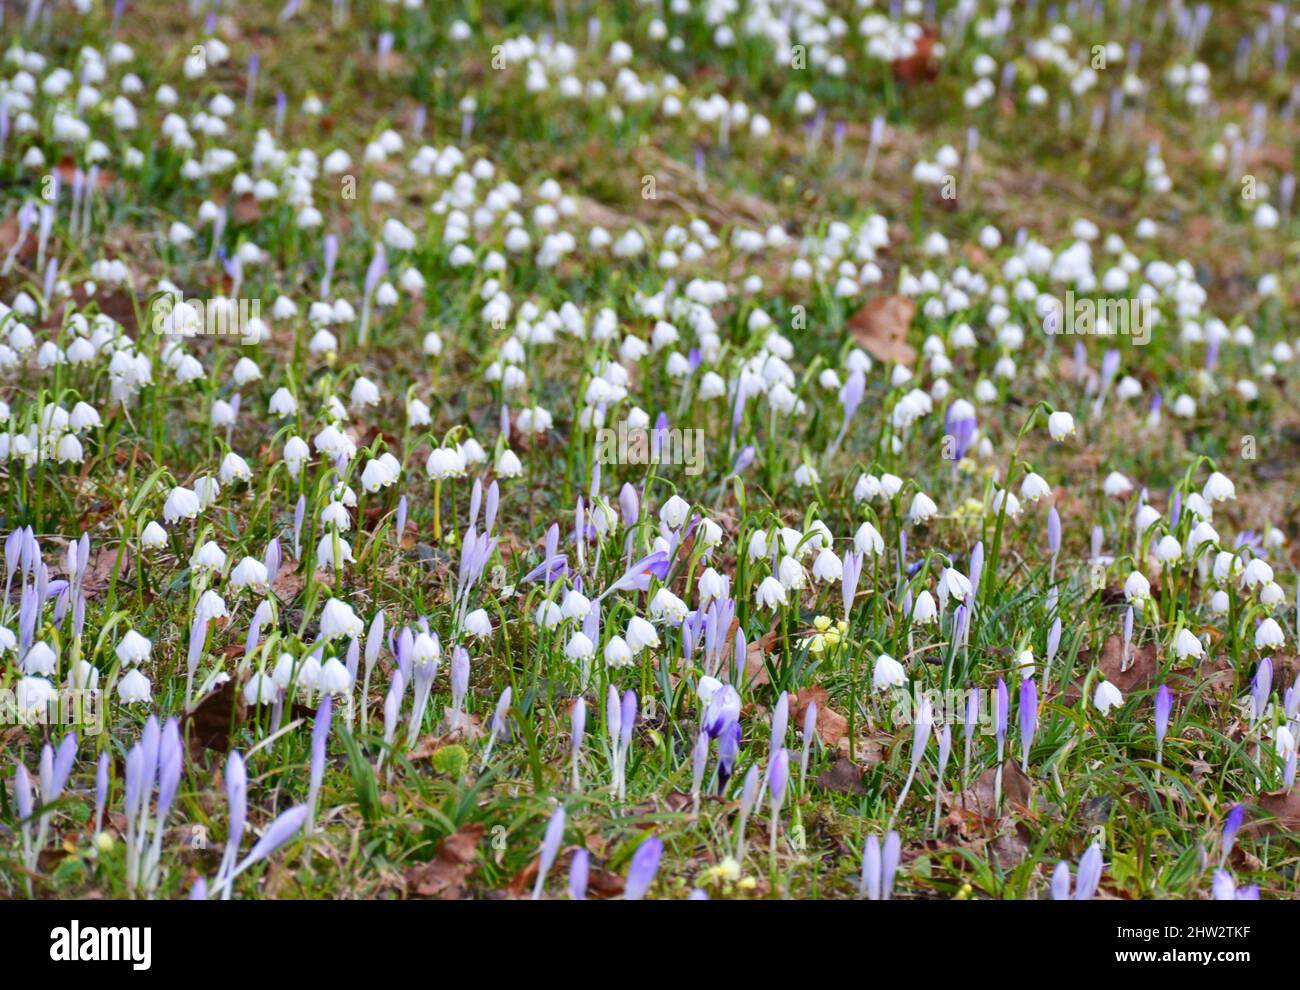 White crocus flowers blooming in the meadow Stock Photo